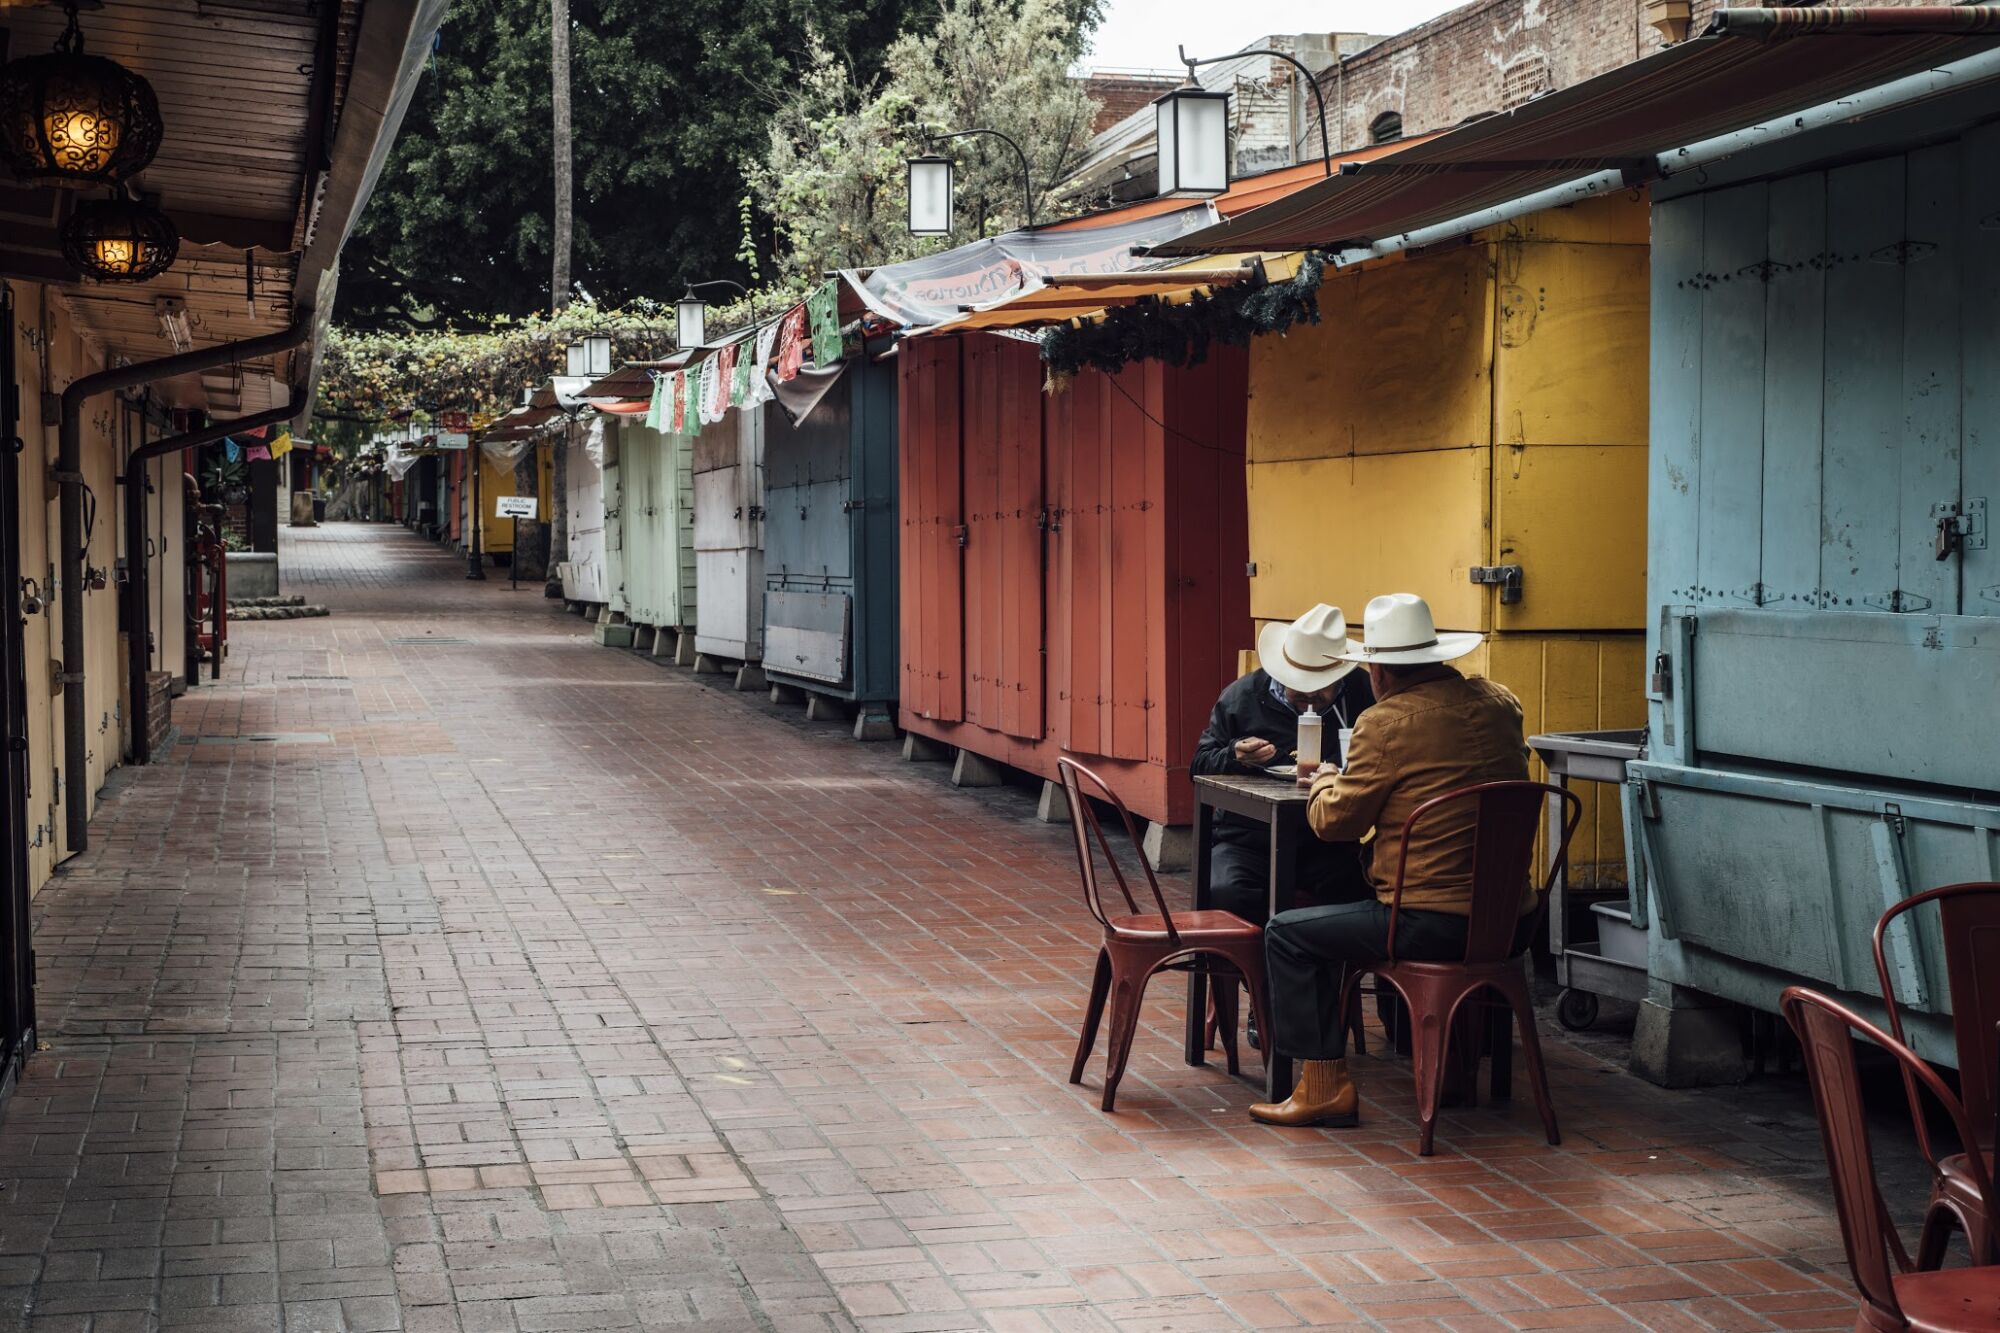 Two men in cowboy hats sit at a solitary dining table outside closed stalls on Olvera Street